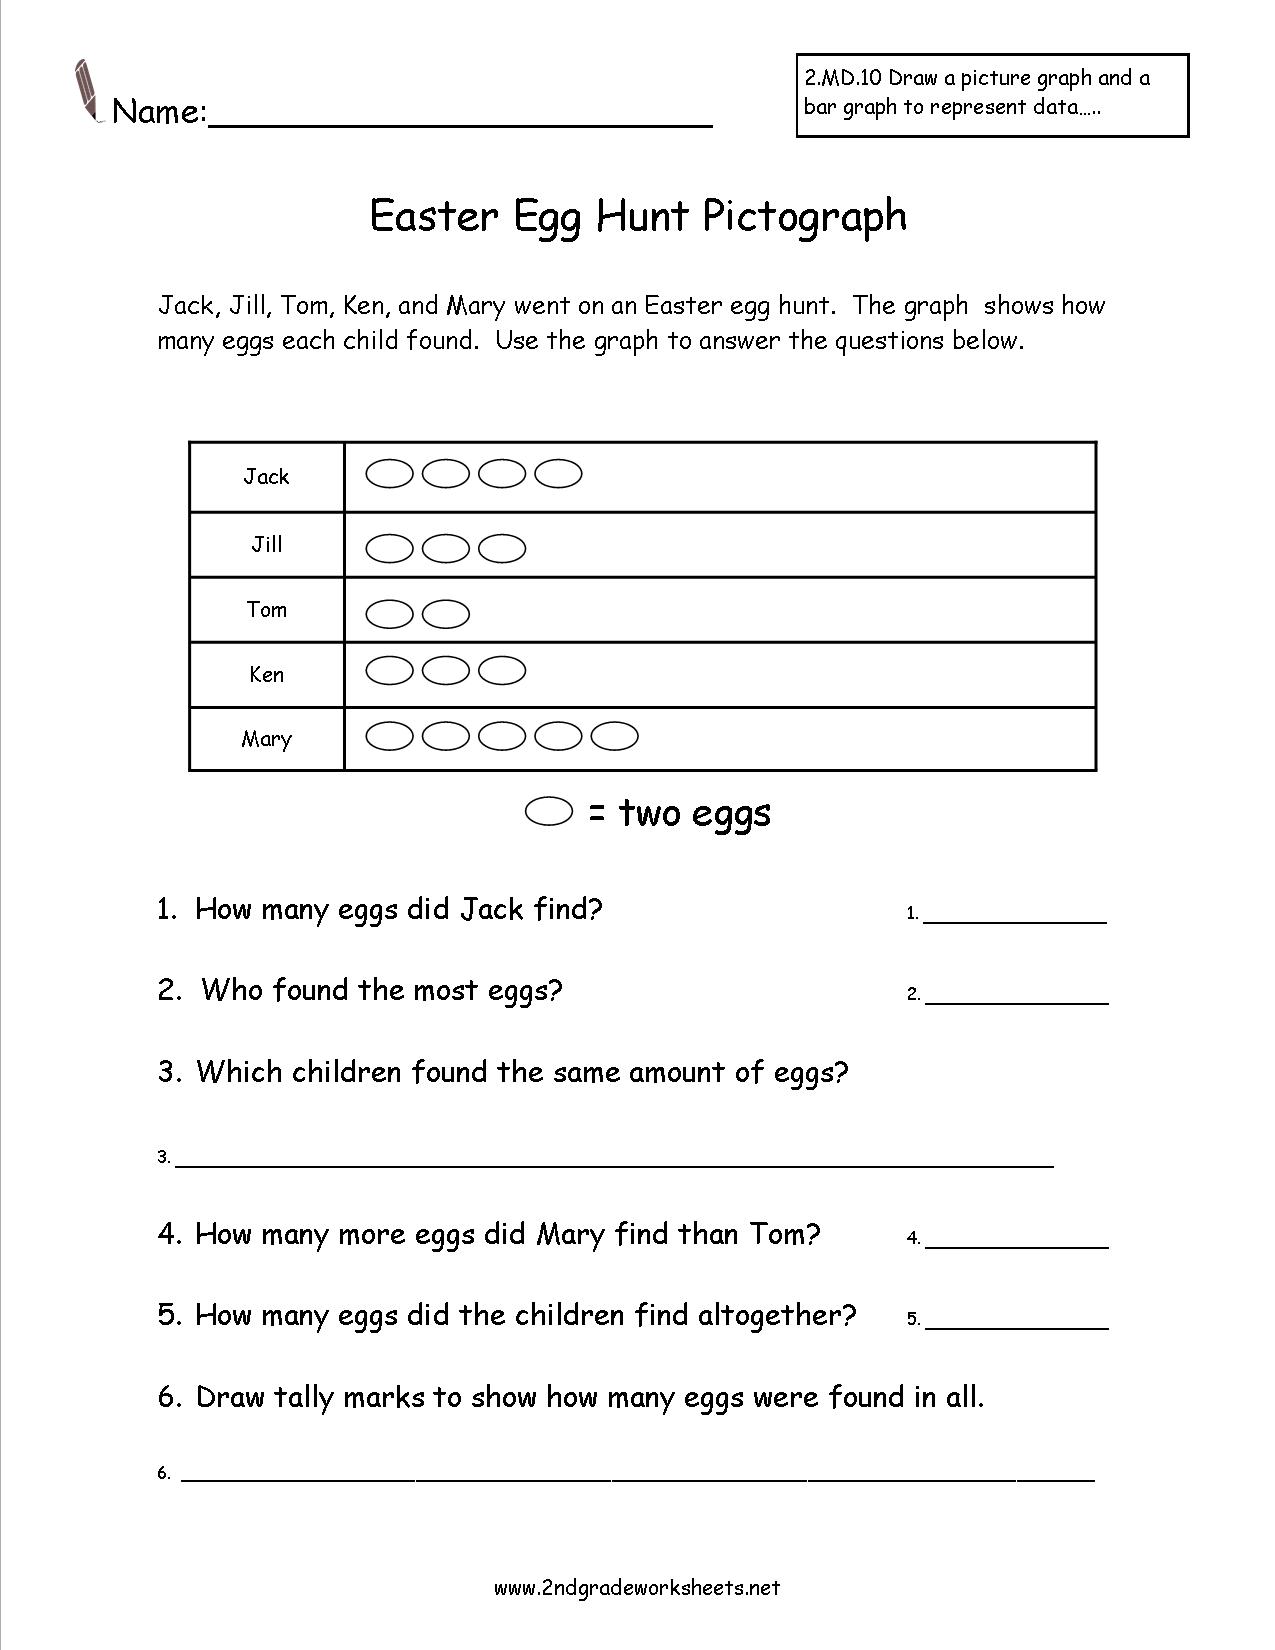 Pictograph Worksheets 3rd Grade Image